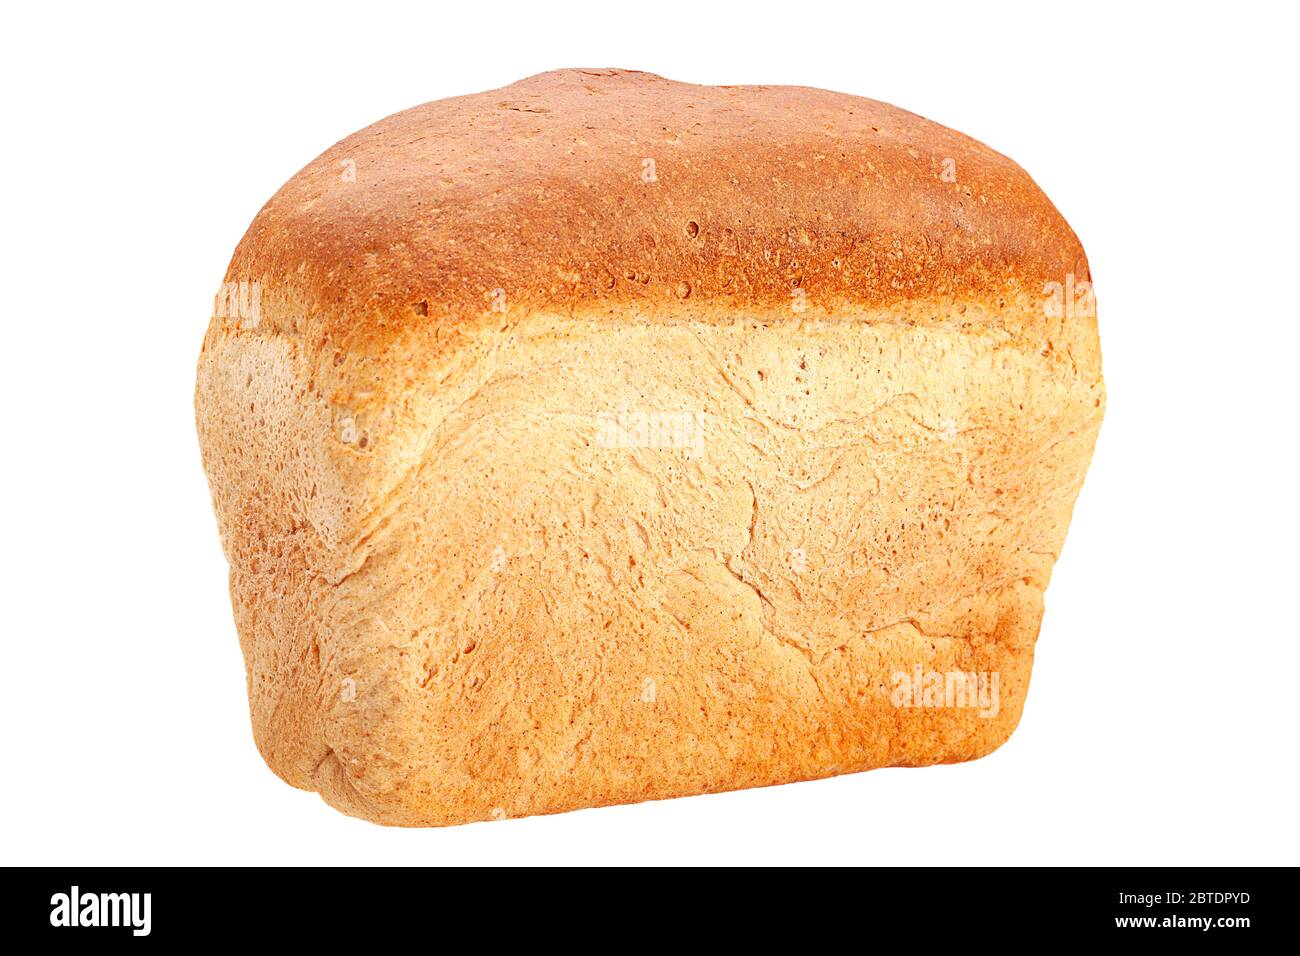 Square bread loaf isolated on white background Stock Photo